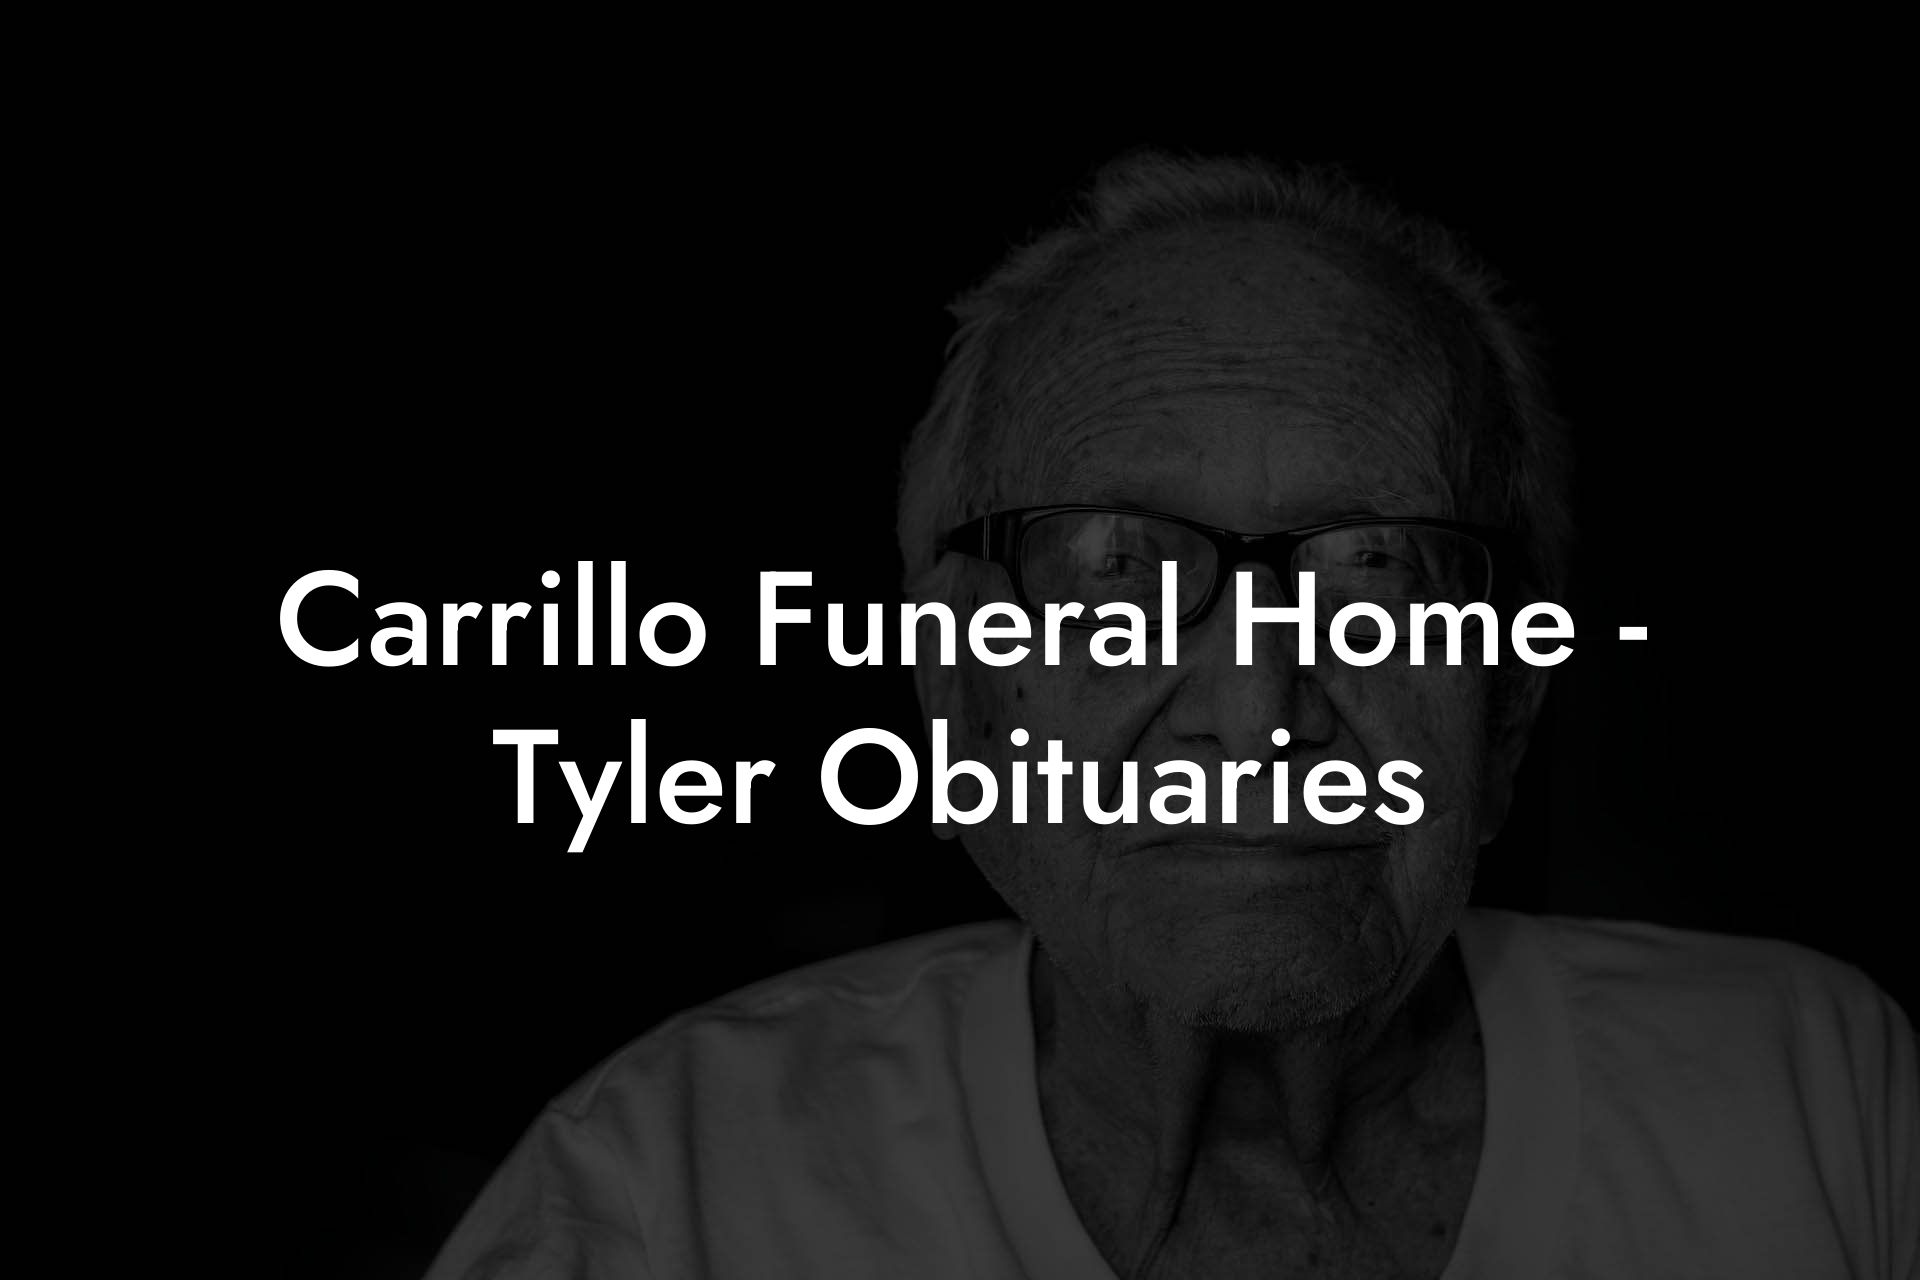 Carrillo Funeral Home - Tyler Obituaries